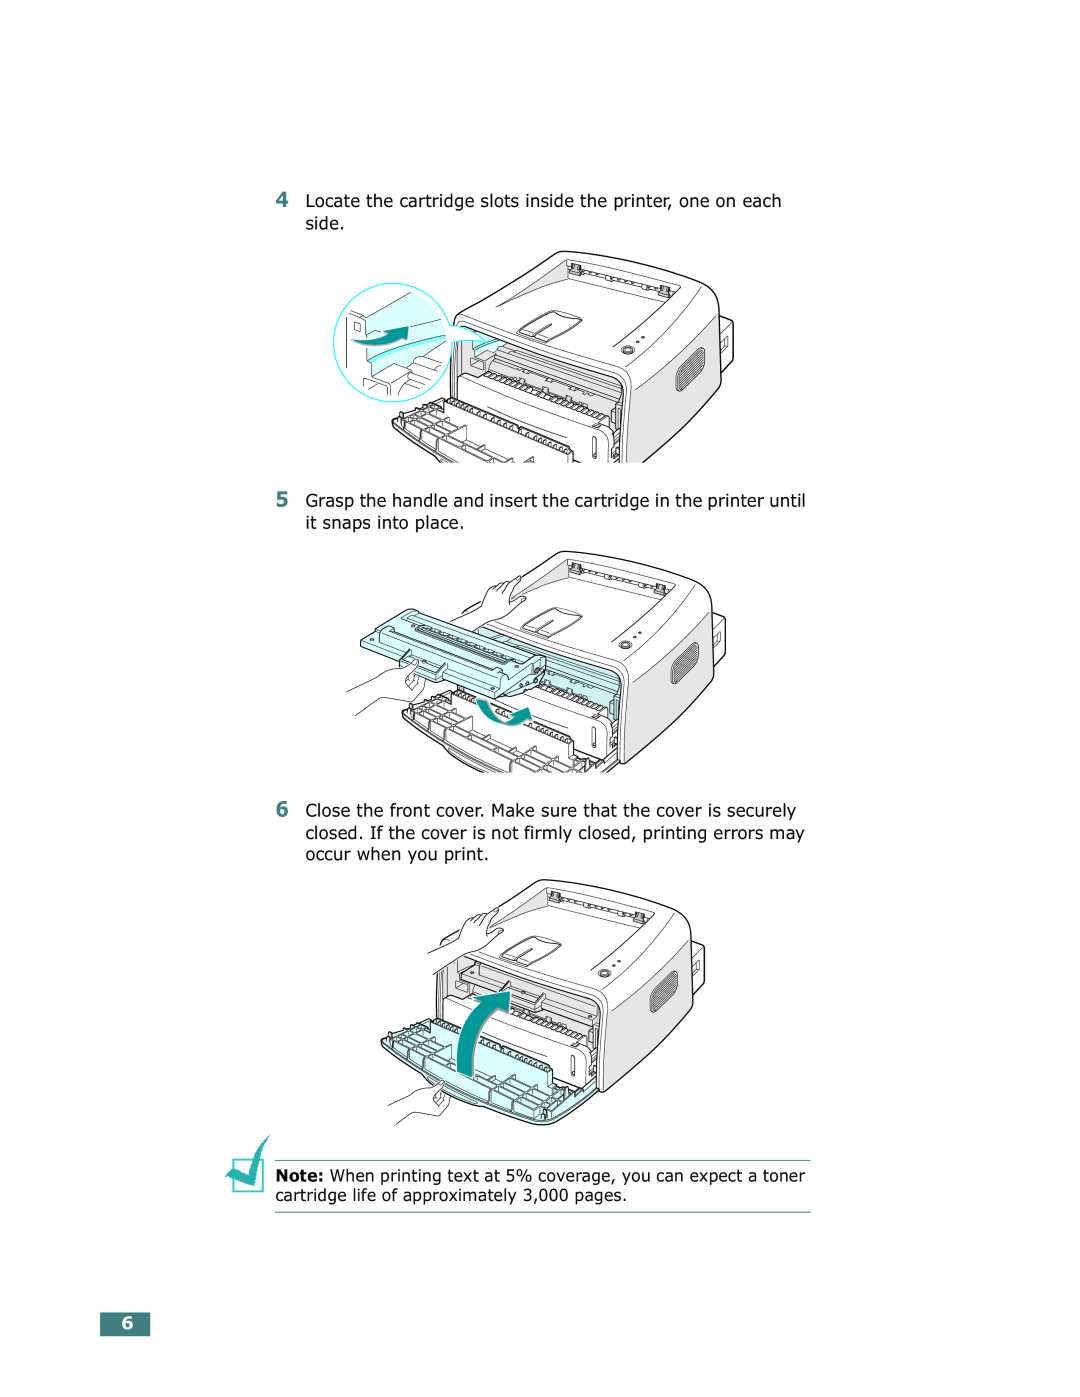 Xerox Phaser 3130 manual Locate the cartridge slots inside the printer, one on each side 